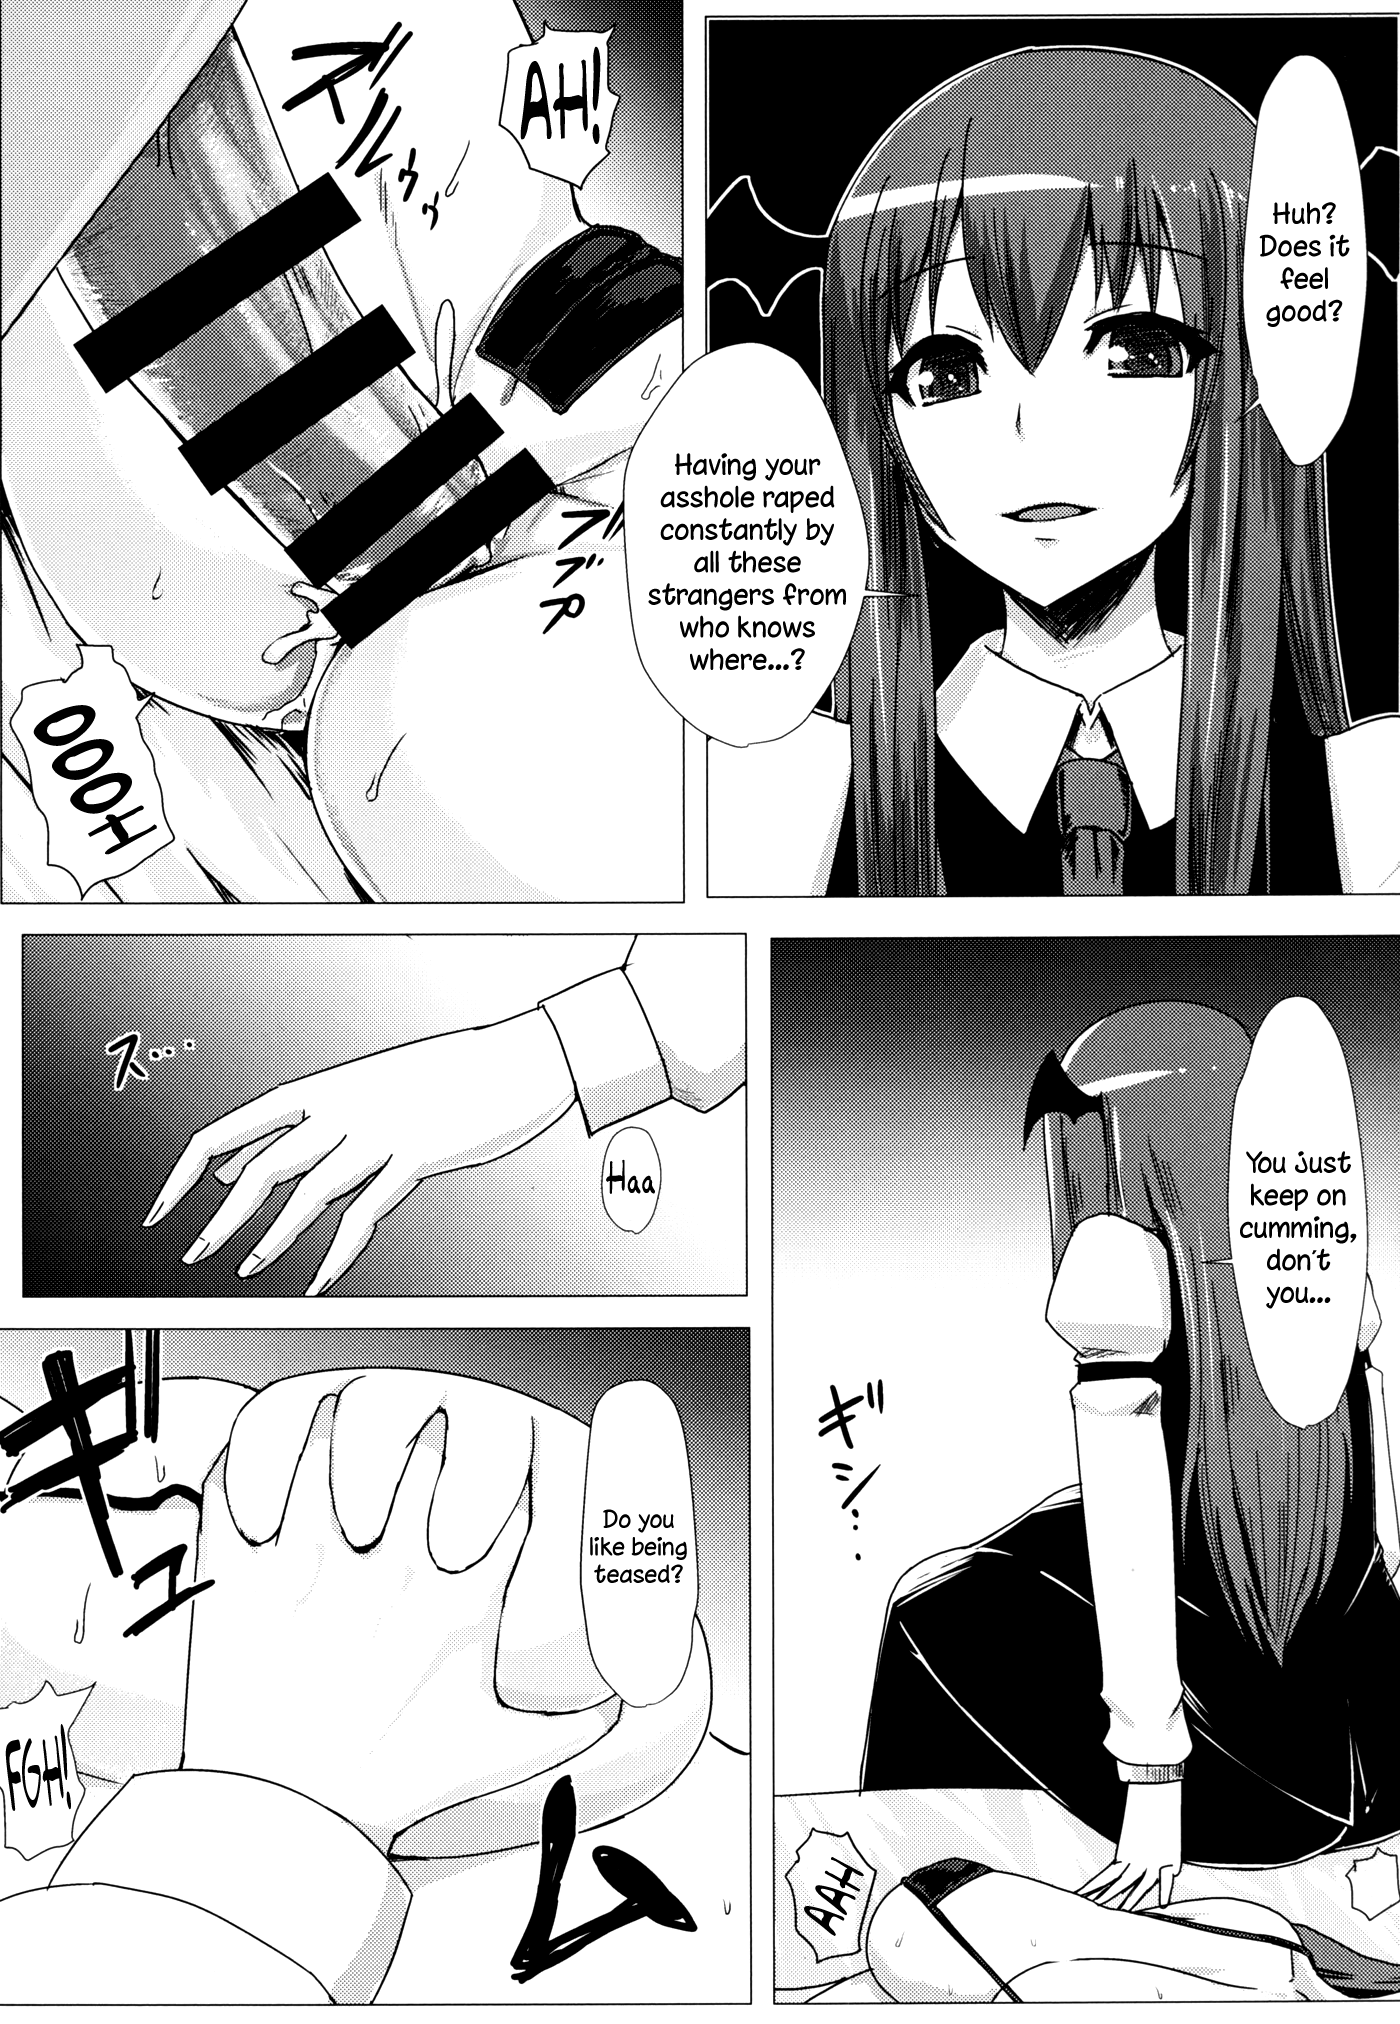 Ass Patchy Patchy hentai manga picture 6